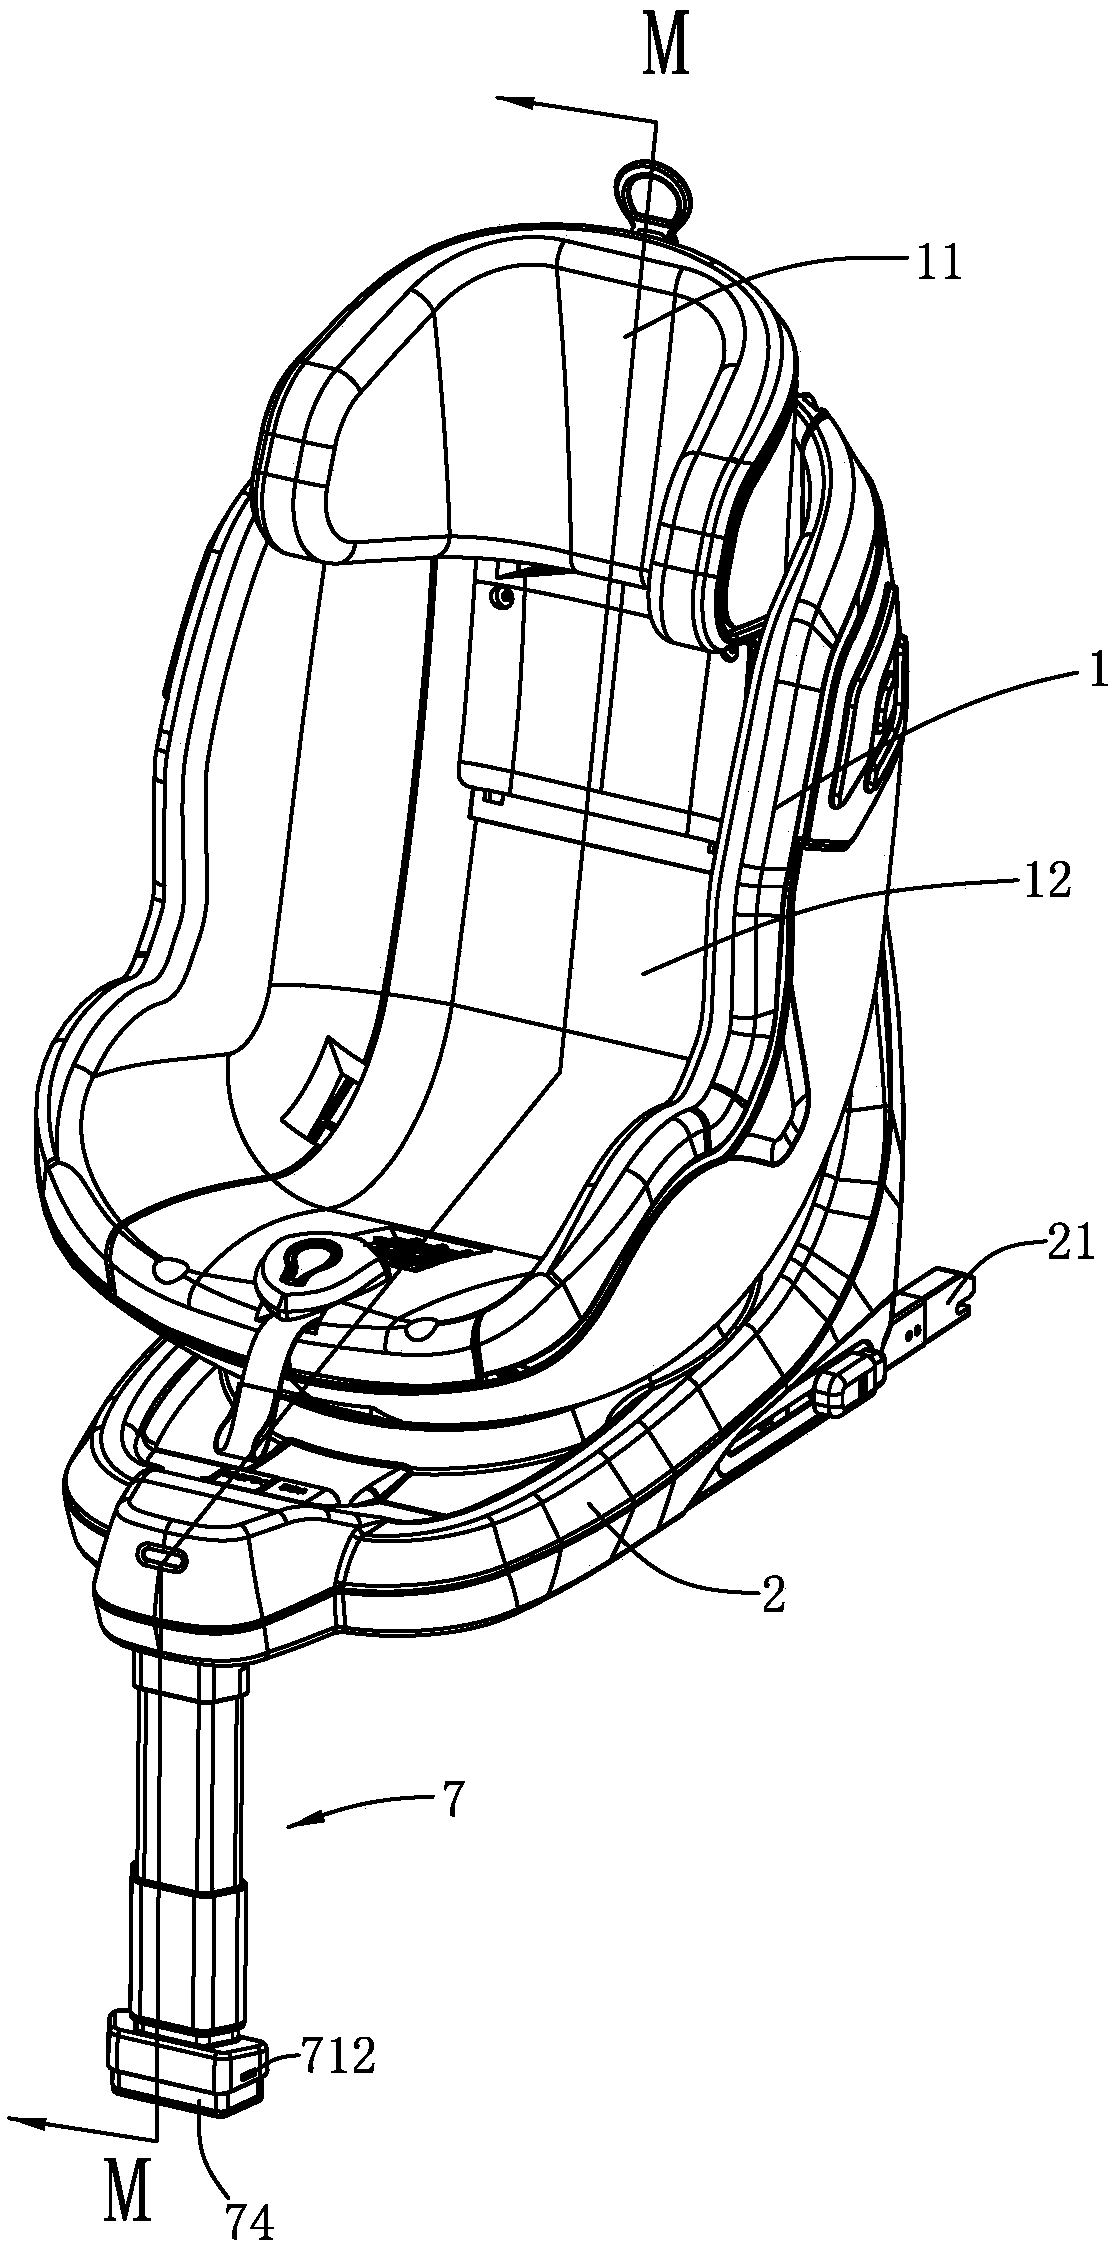 360-degree rotating child safety seat for automobile